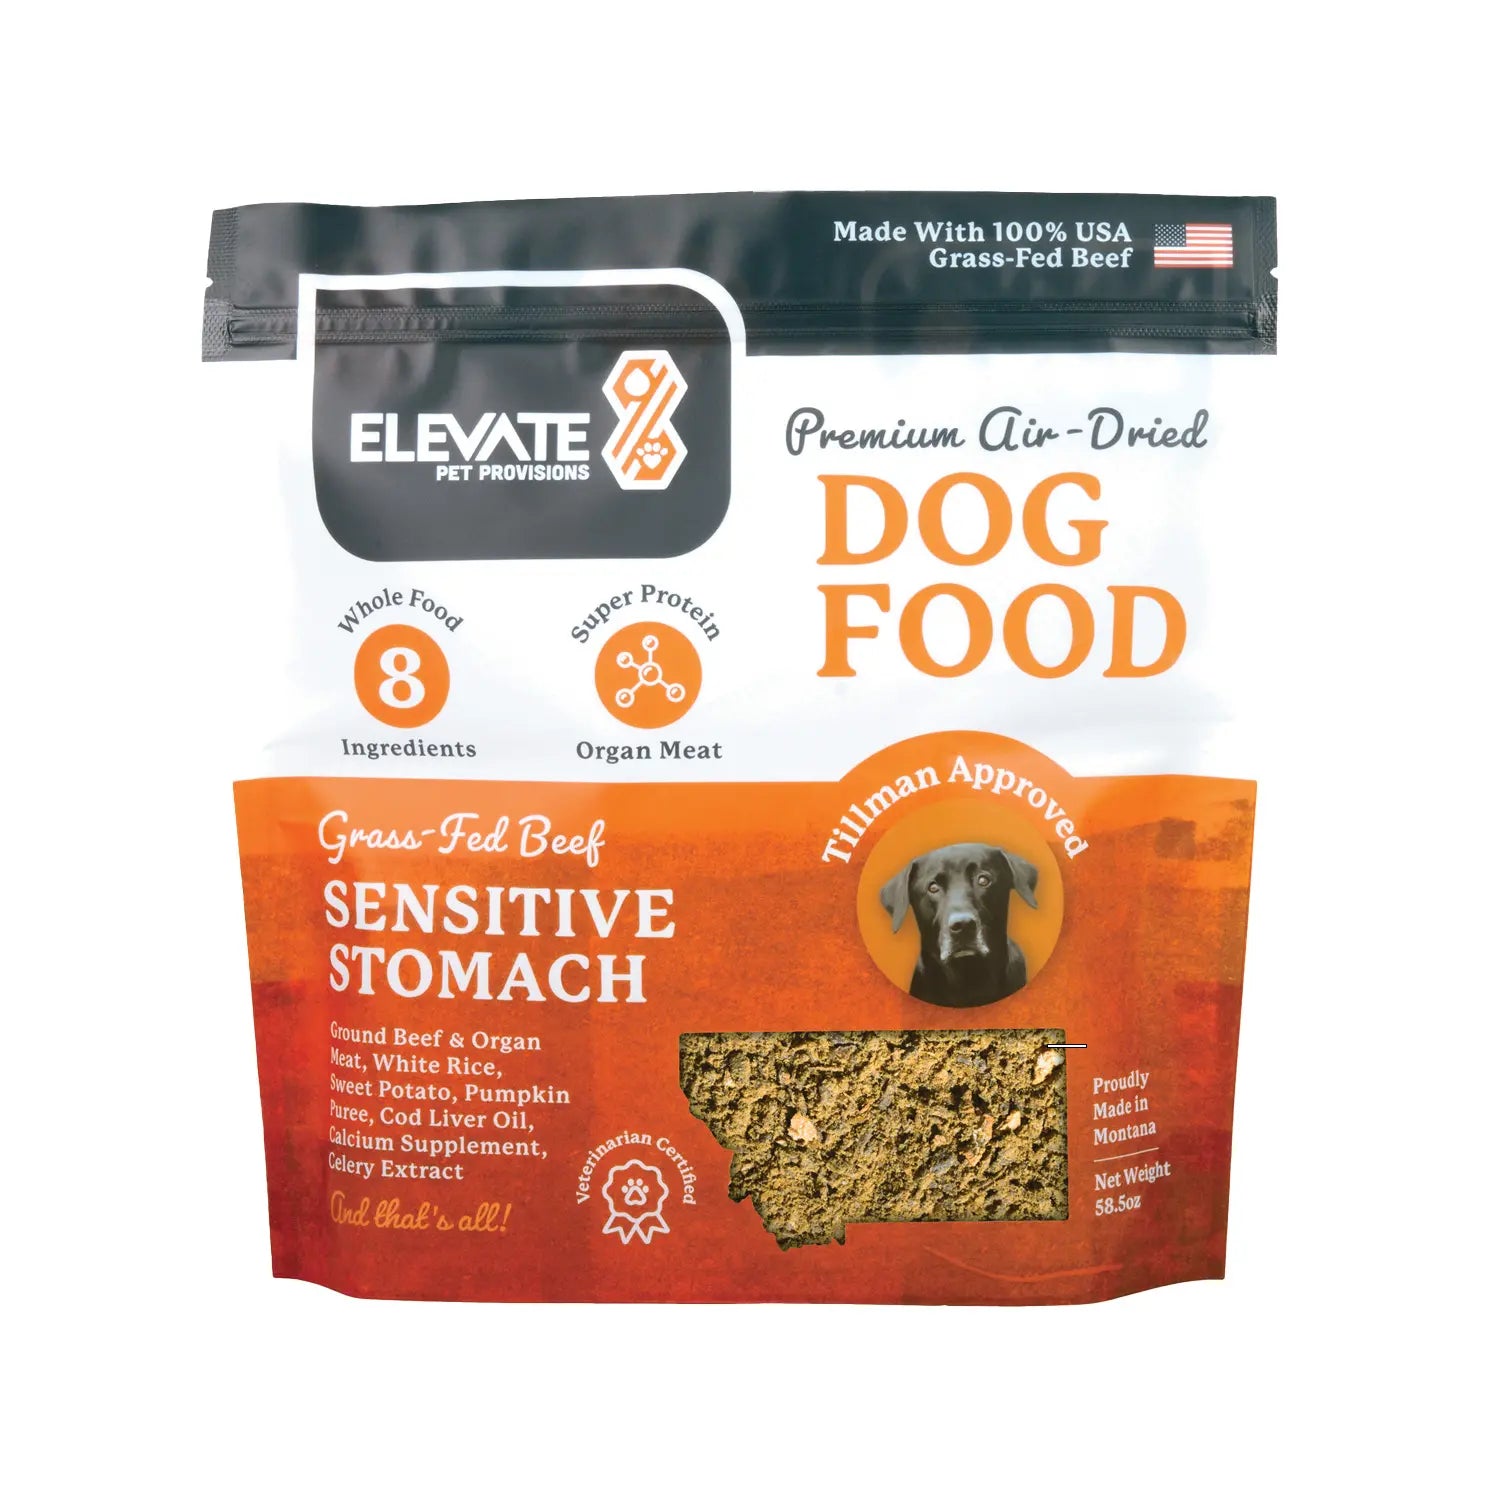 Elevate Pet Provisions - Premium Air Dried Dog Food - Grass Fed Beef - Sensitive Stomach - Whole 8 Ingredients - Super Protein Organ Meat